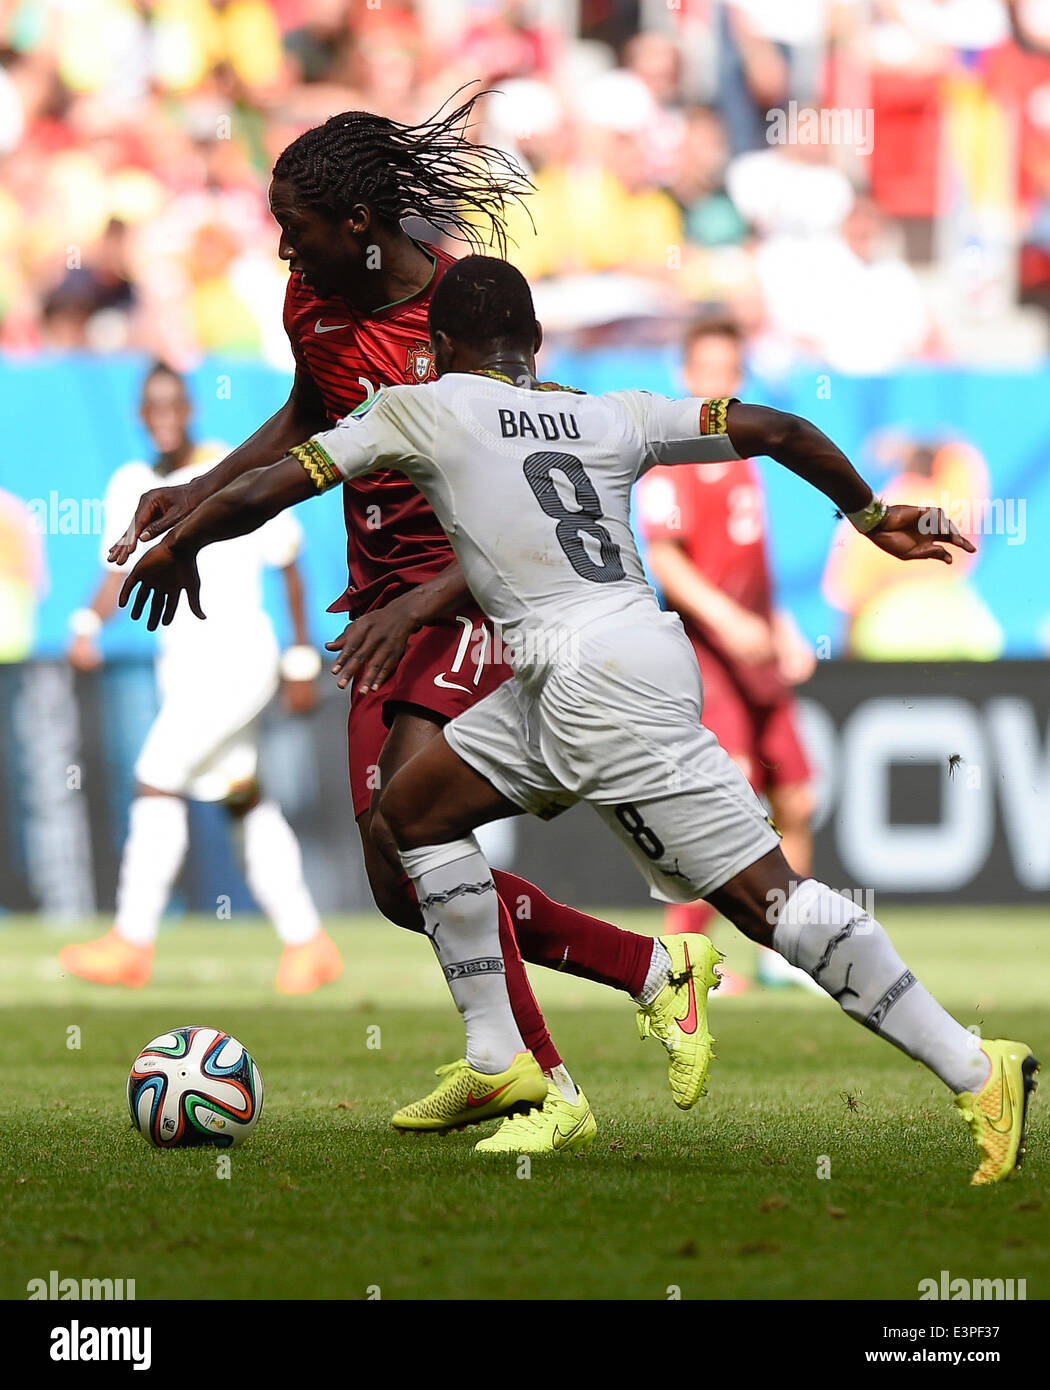 Brasilia, Brazil. 26th June, 2014. Portugal's Eder (L) competes with Ghana's Emmanuel Agyemang-Badu during a Group G match between Portugal and Ghana of 2014 FIFA World Cup at the Estadio Nacional Stadium in Brasilia, Brazil, June 26, 2014. Portugal won 2-1 over Ghana on Thursday. © Qi Heng/Xinhua/Alamy Live News Stock Photo